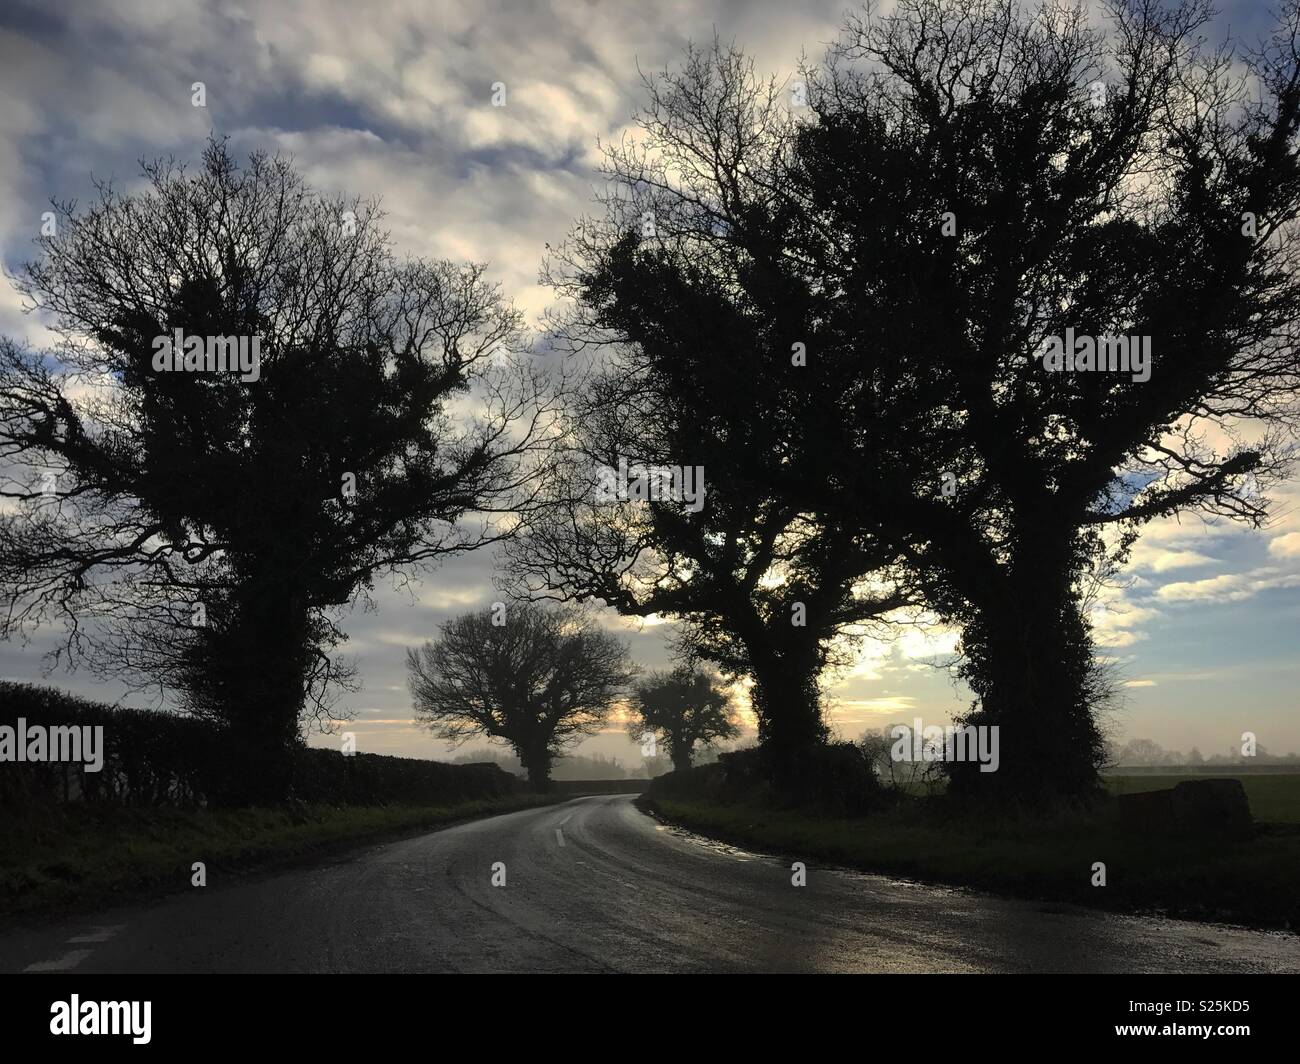 Tree lined road with spooky trees Stock Photo